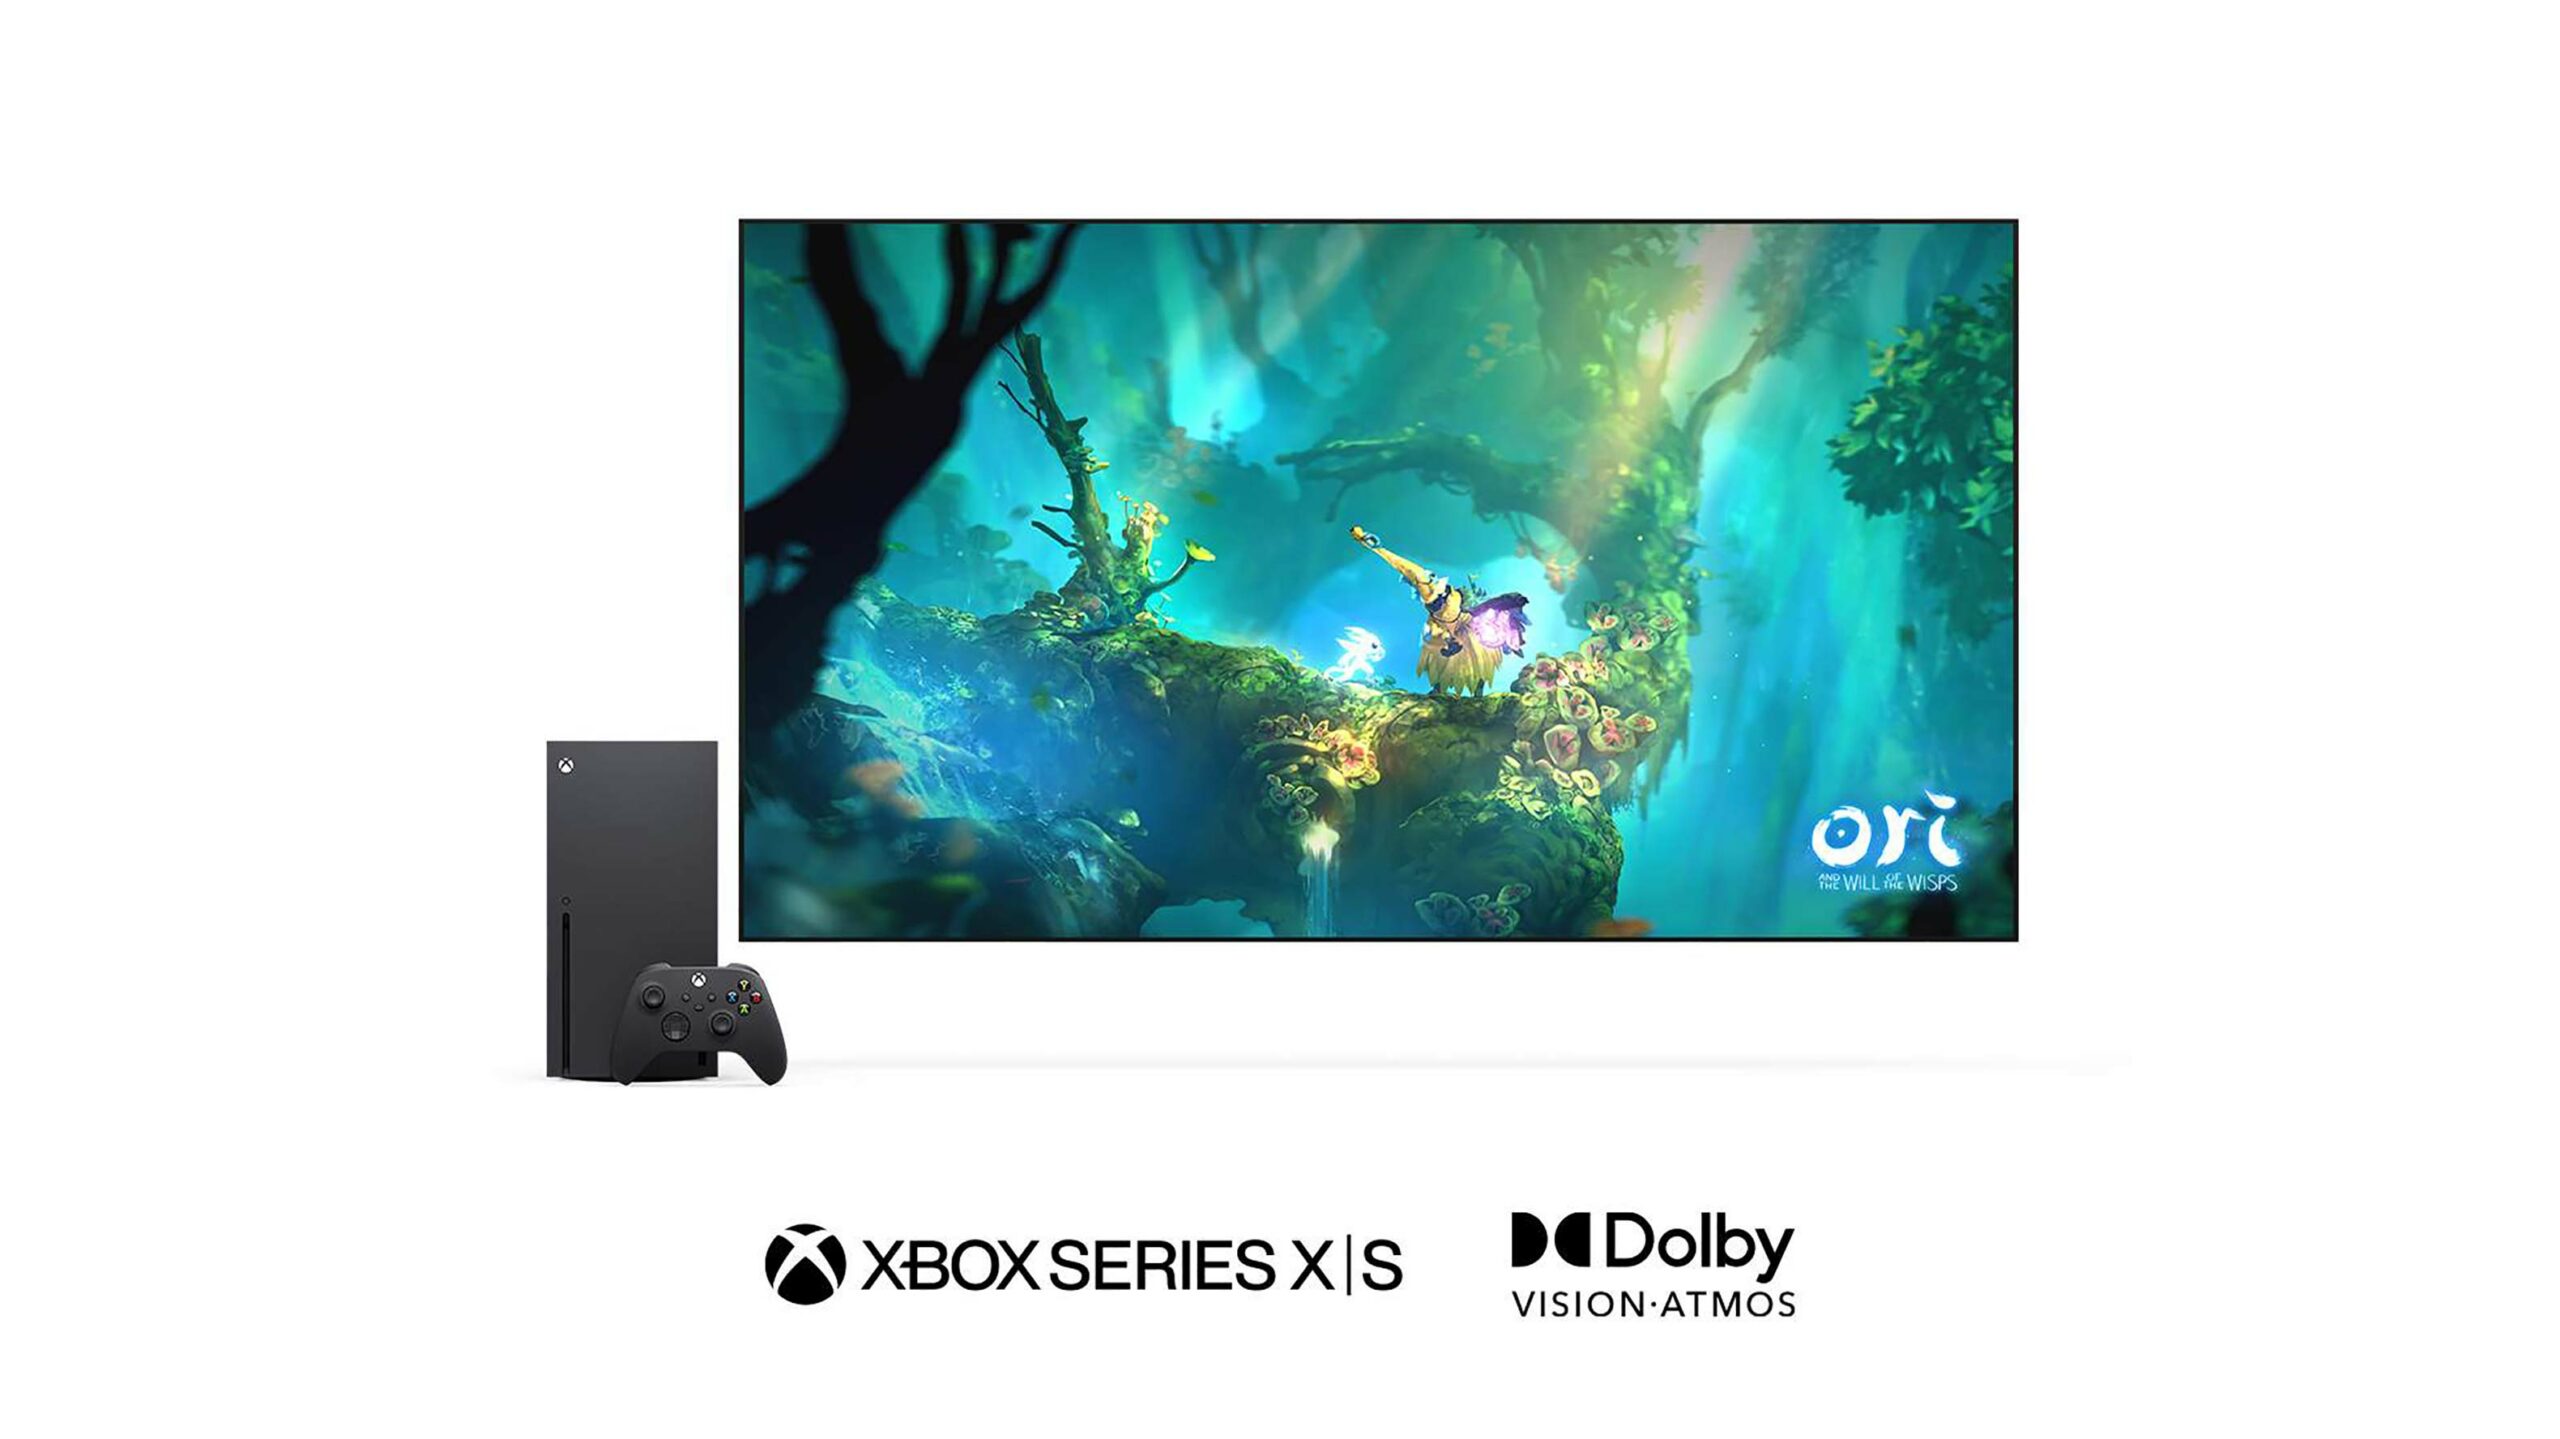 Xbox Series X/S Dolby Vision